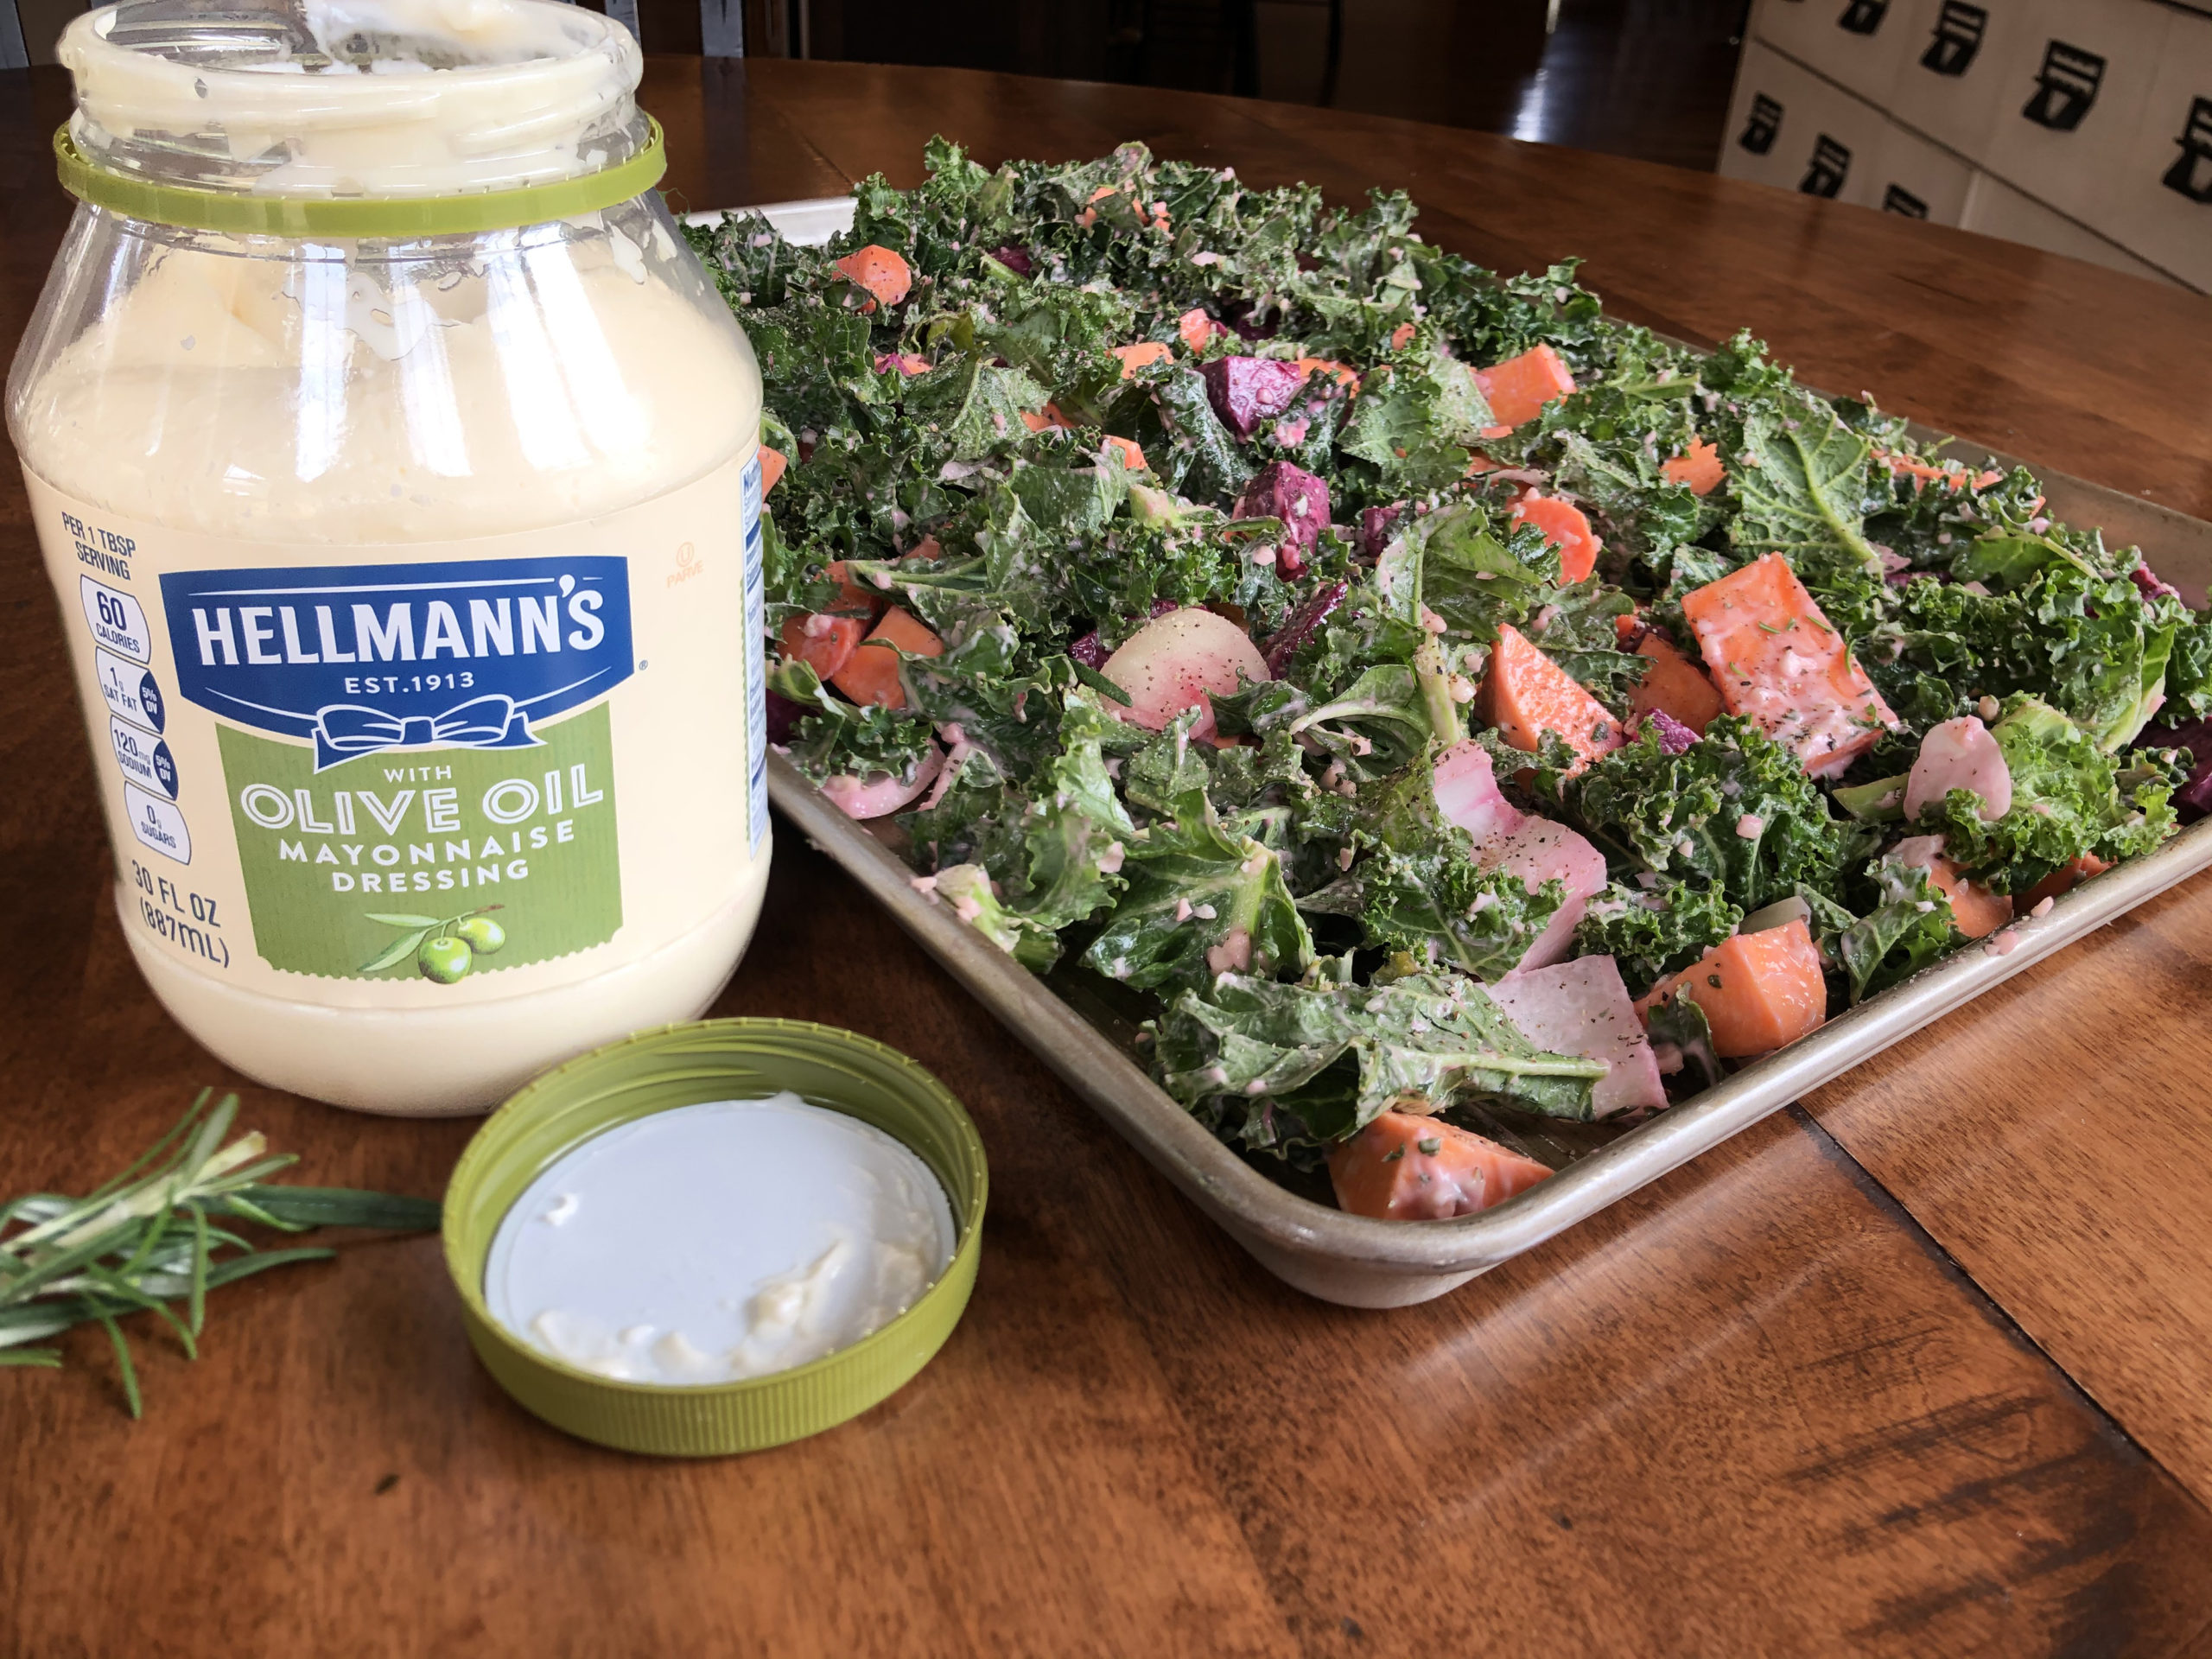 Big Savings On Hellmann's Mayonnaise At Publix - Clip Your Coupon! on I Heart Publix